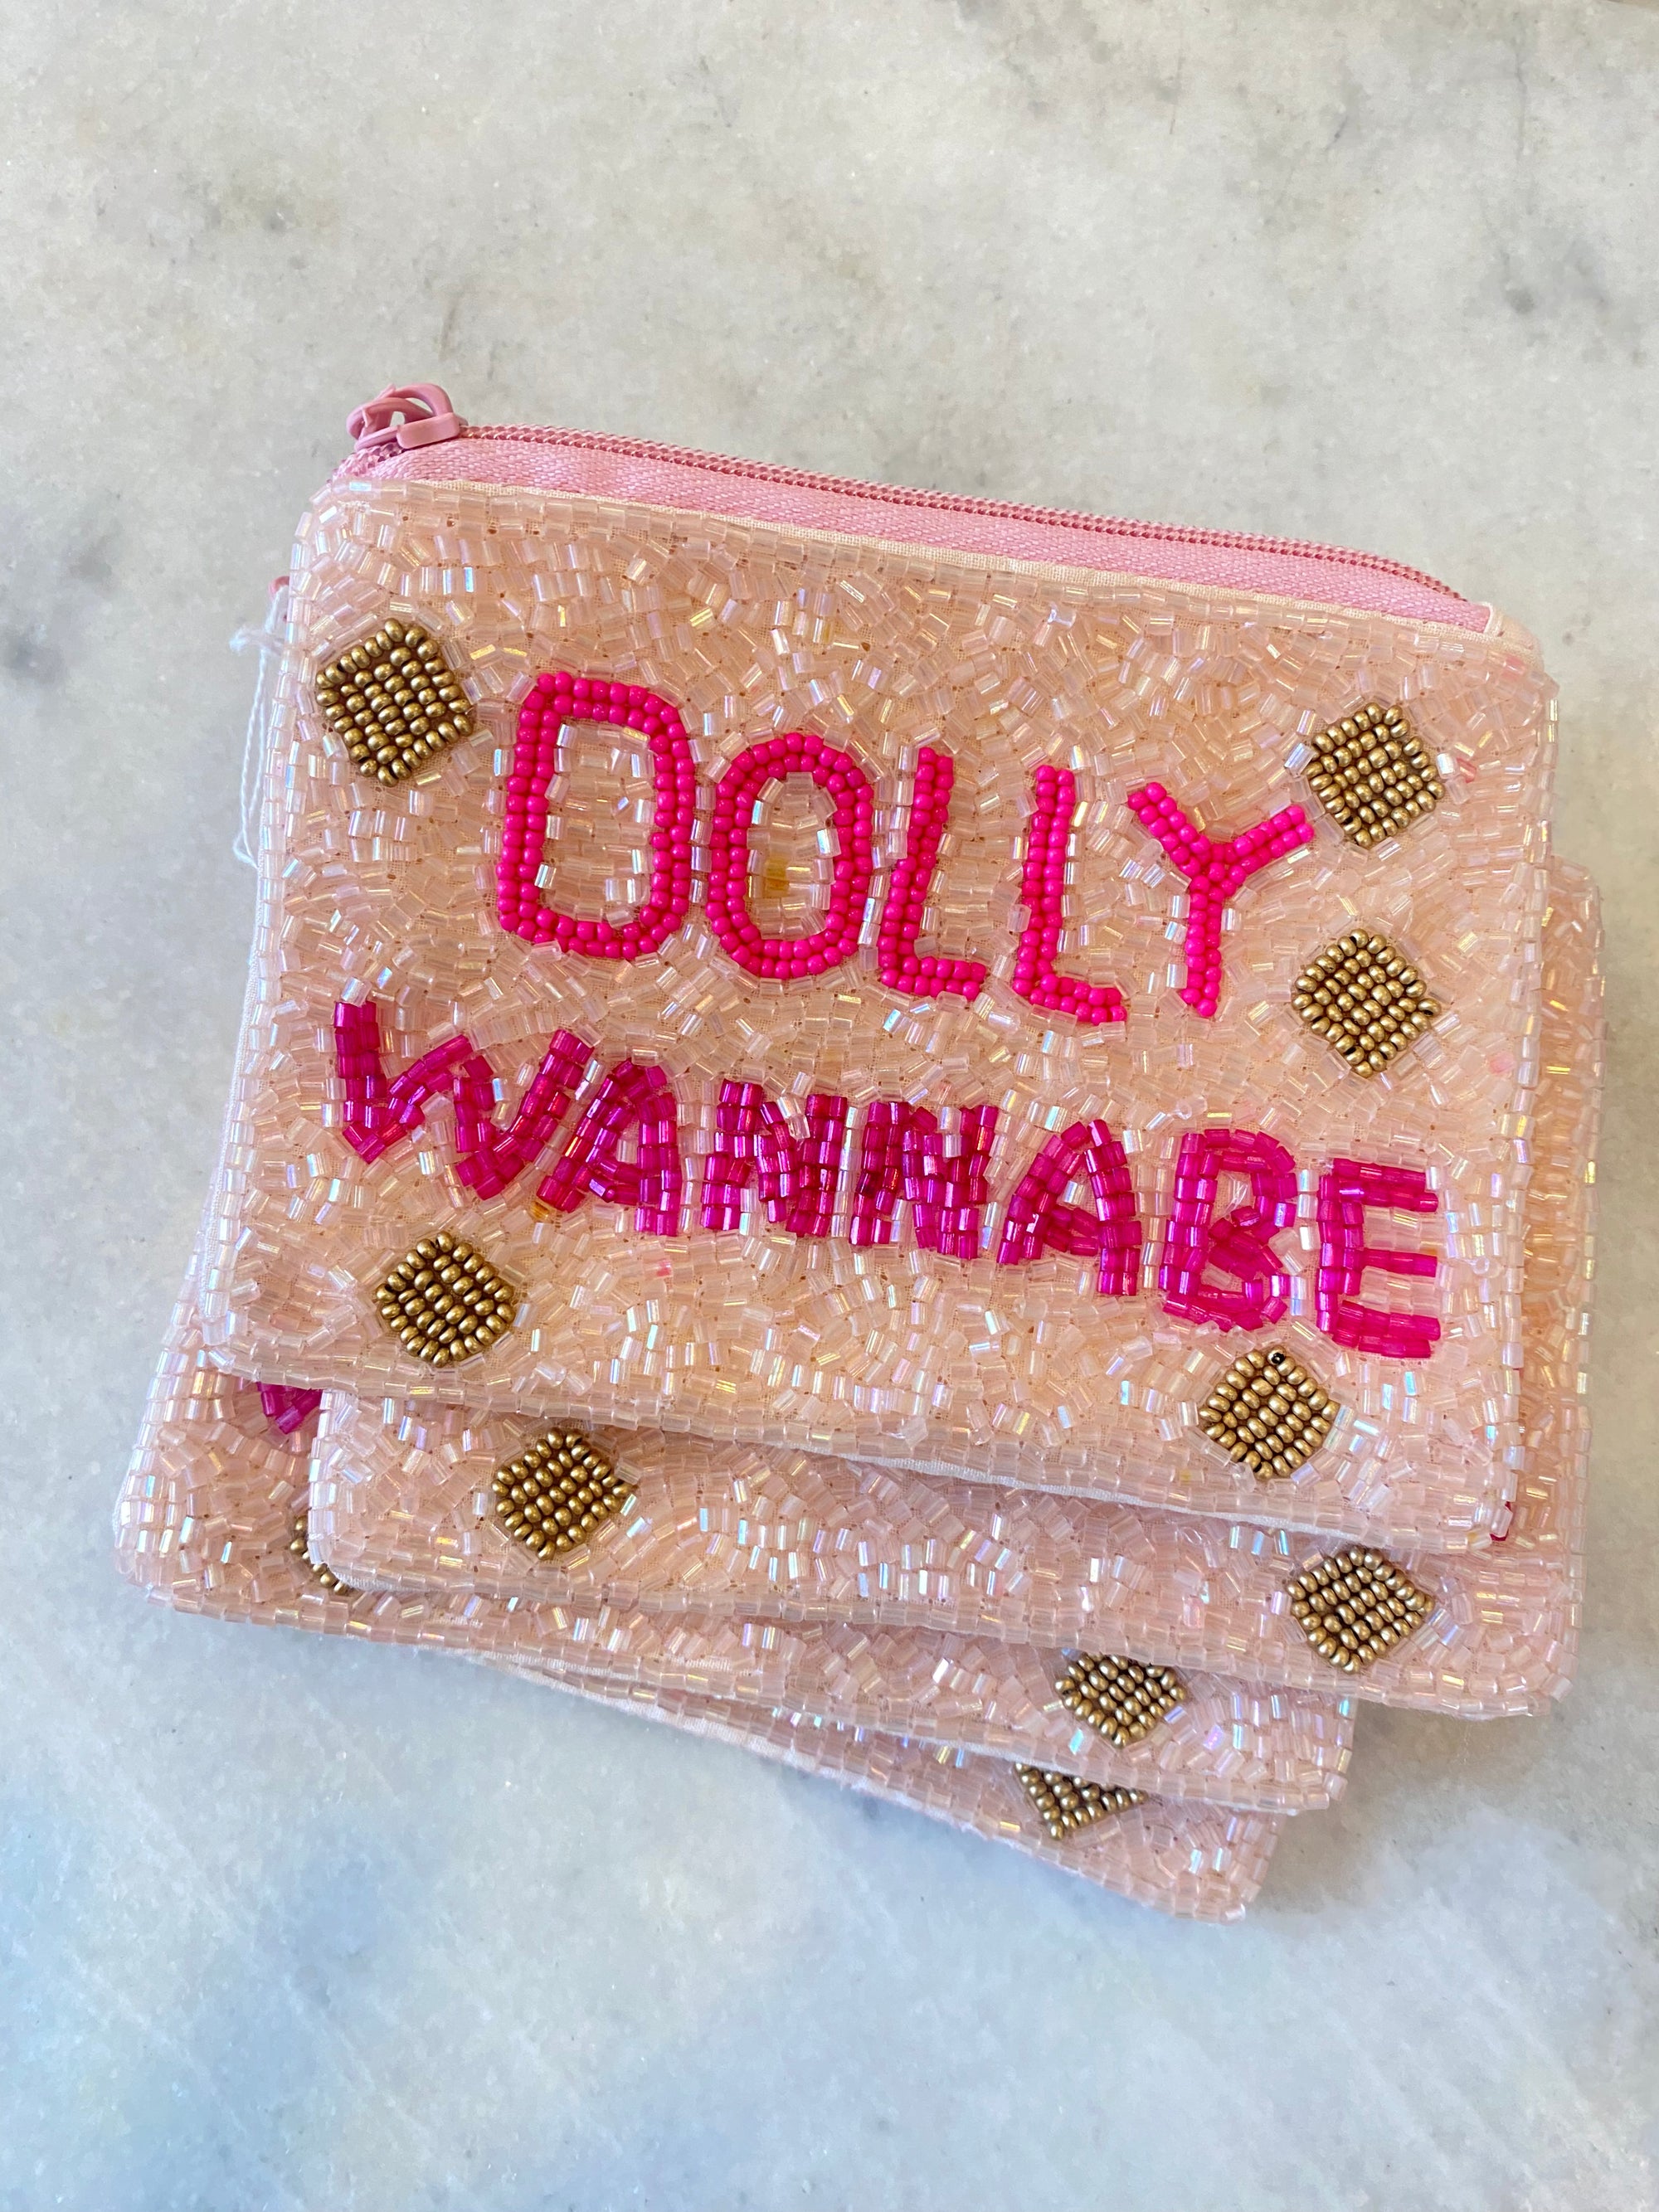 Dolly Wannabe Beaded Pouch